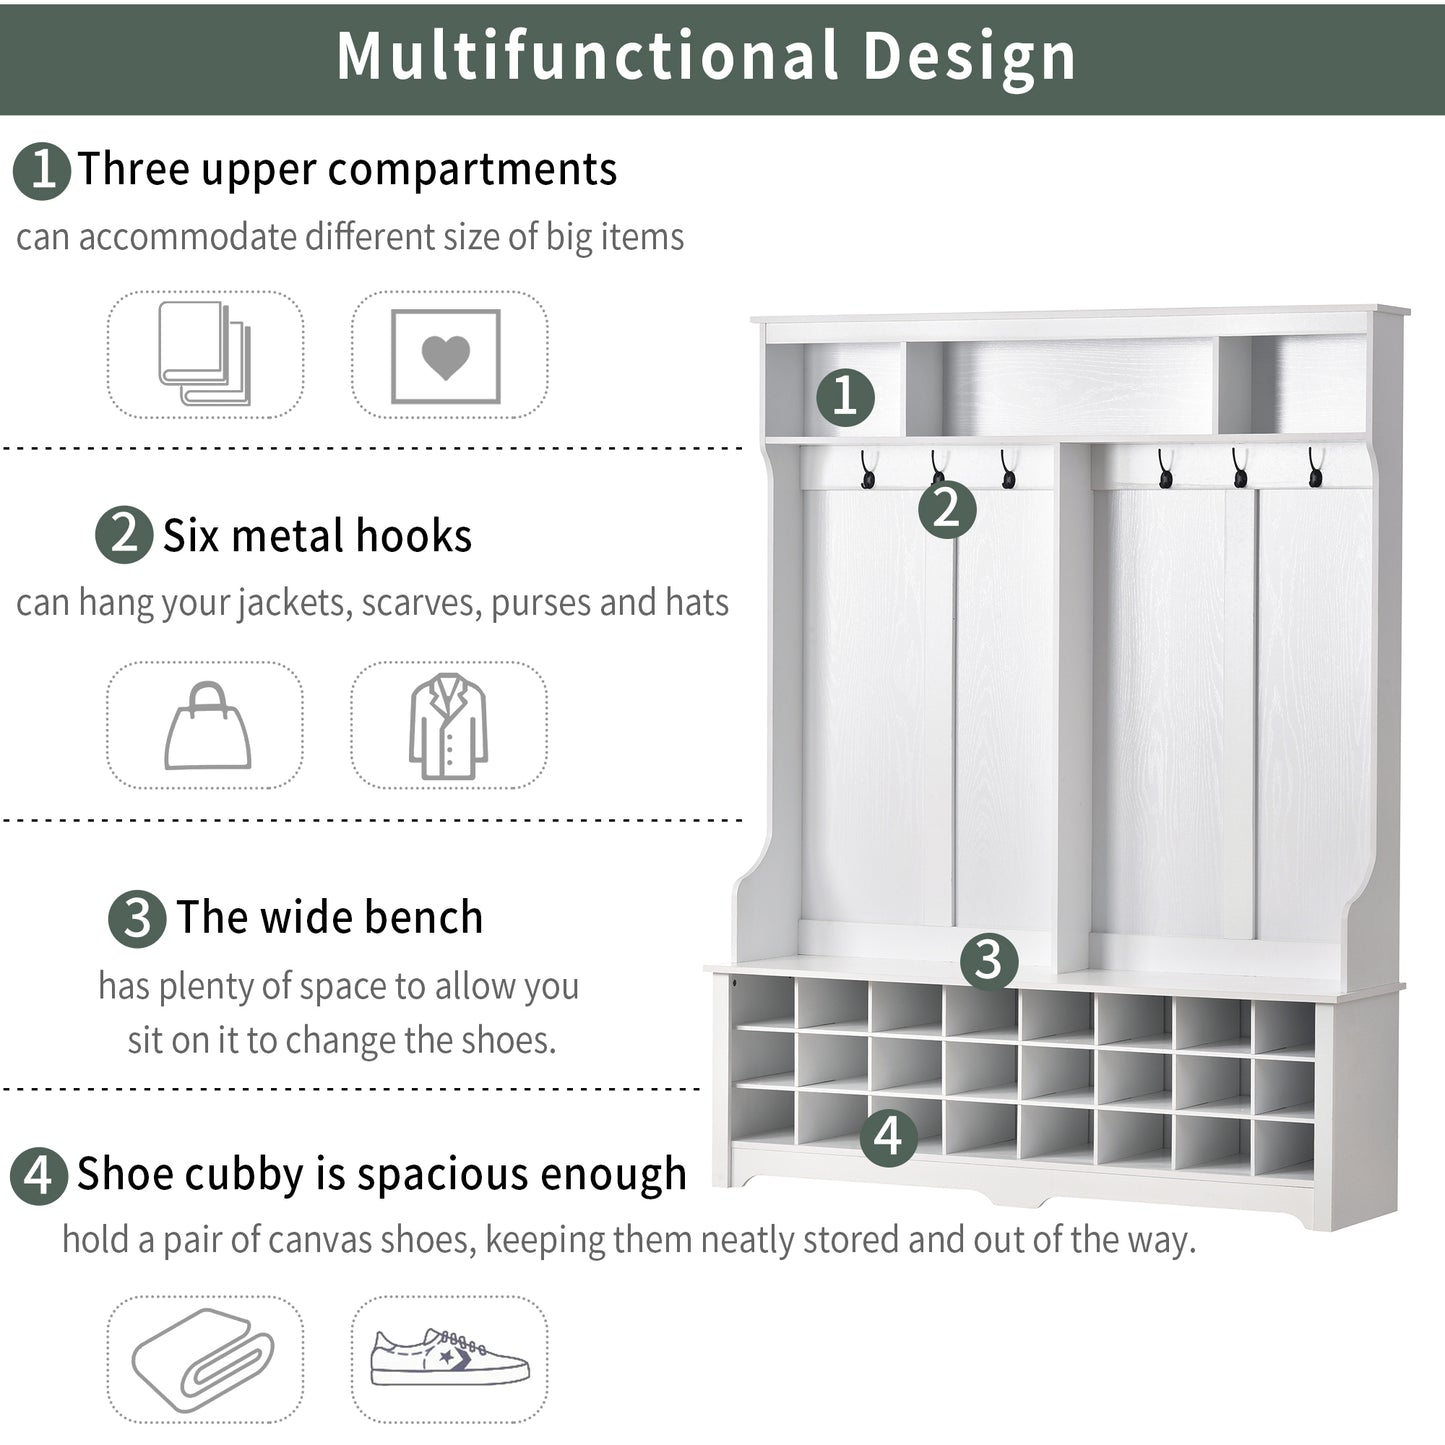 Modern Style Multiple Functions Hallway Coat Rack with Metal Black Hooks, Entryway Bench 60" Wide Hall Tree with Ample Storage Space and 24 Shoe Cubbies, White (